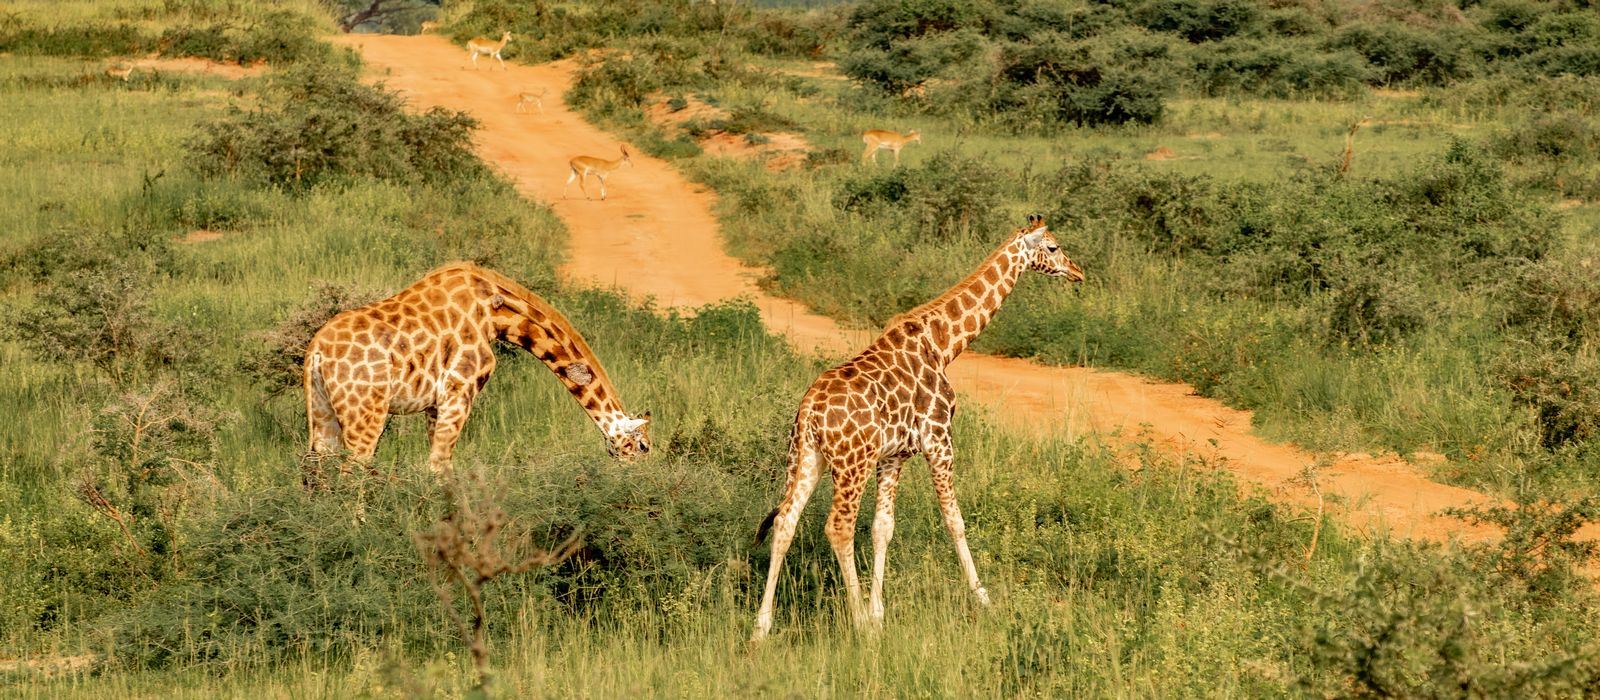 Giraffes at the national park during game drive